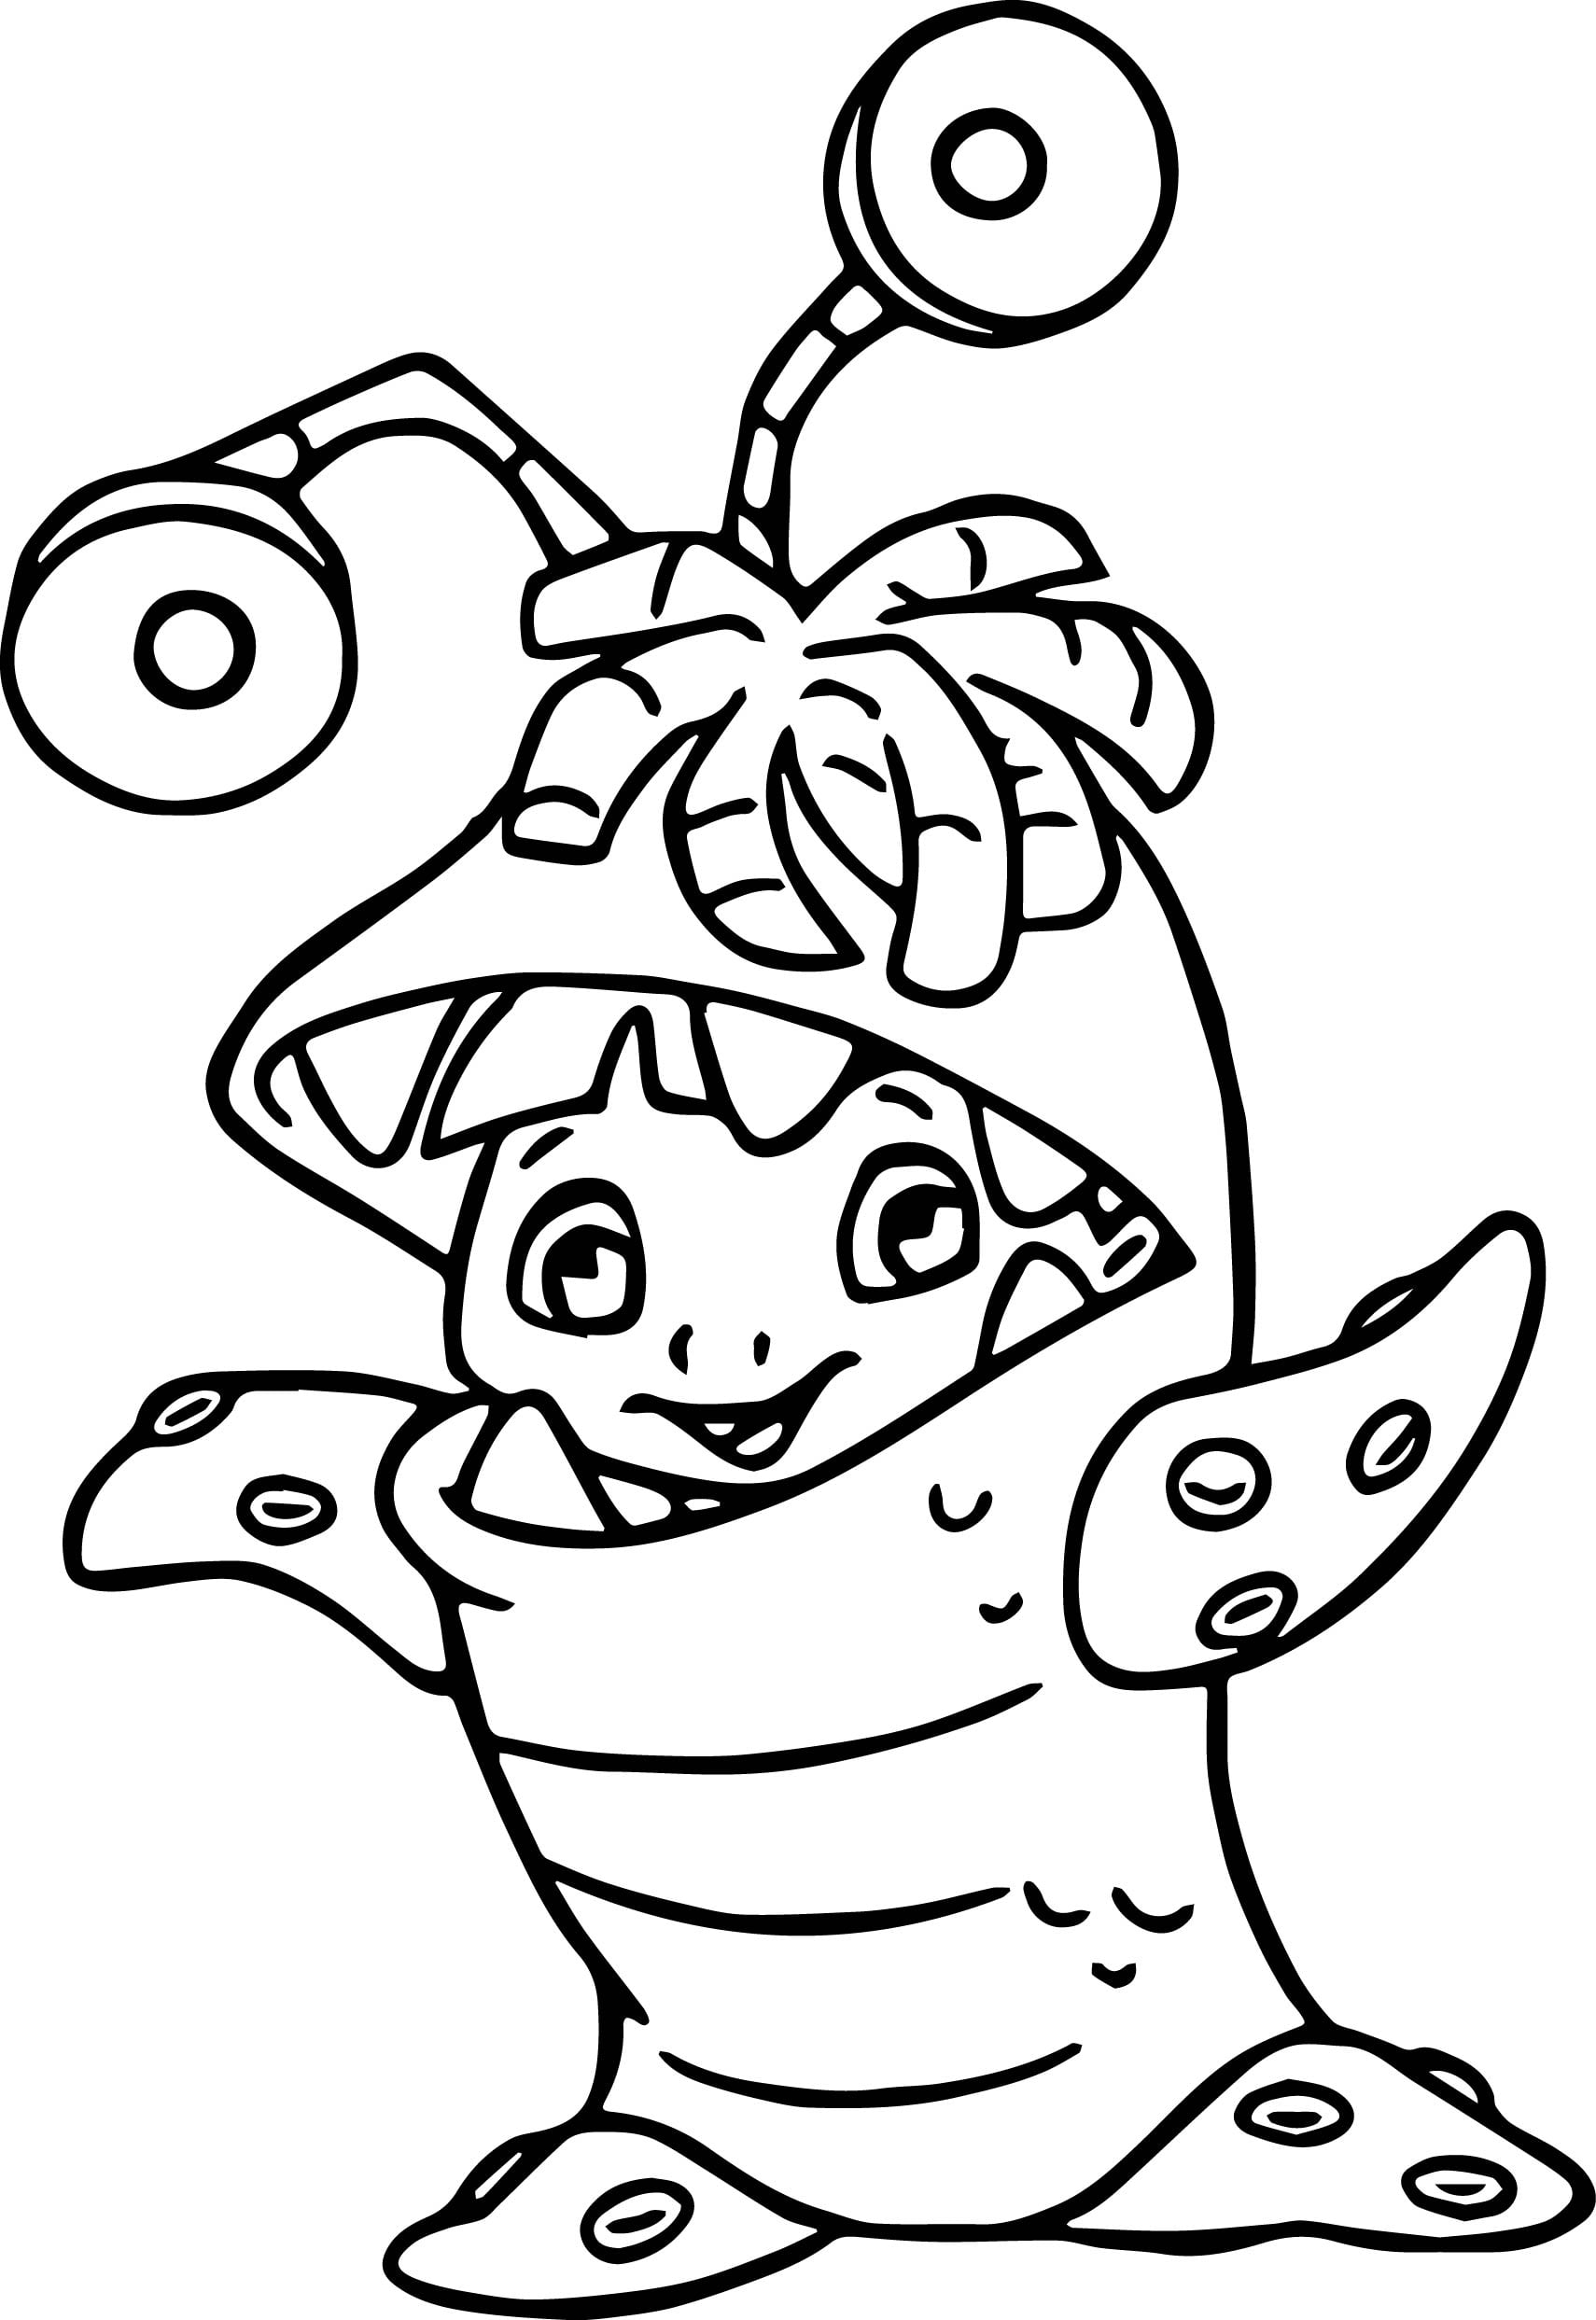 Disney Monsters Inc Coloring Pages Wecoloringpagecom